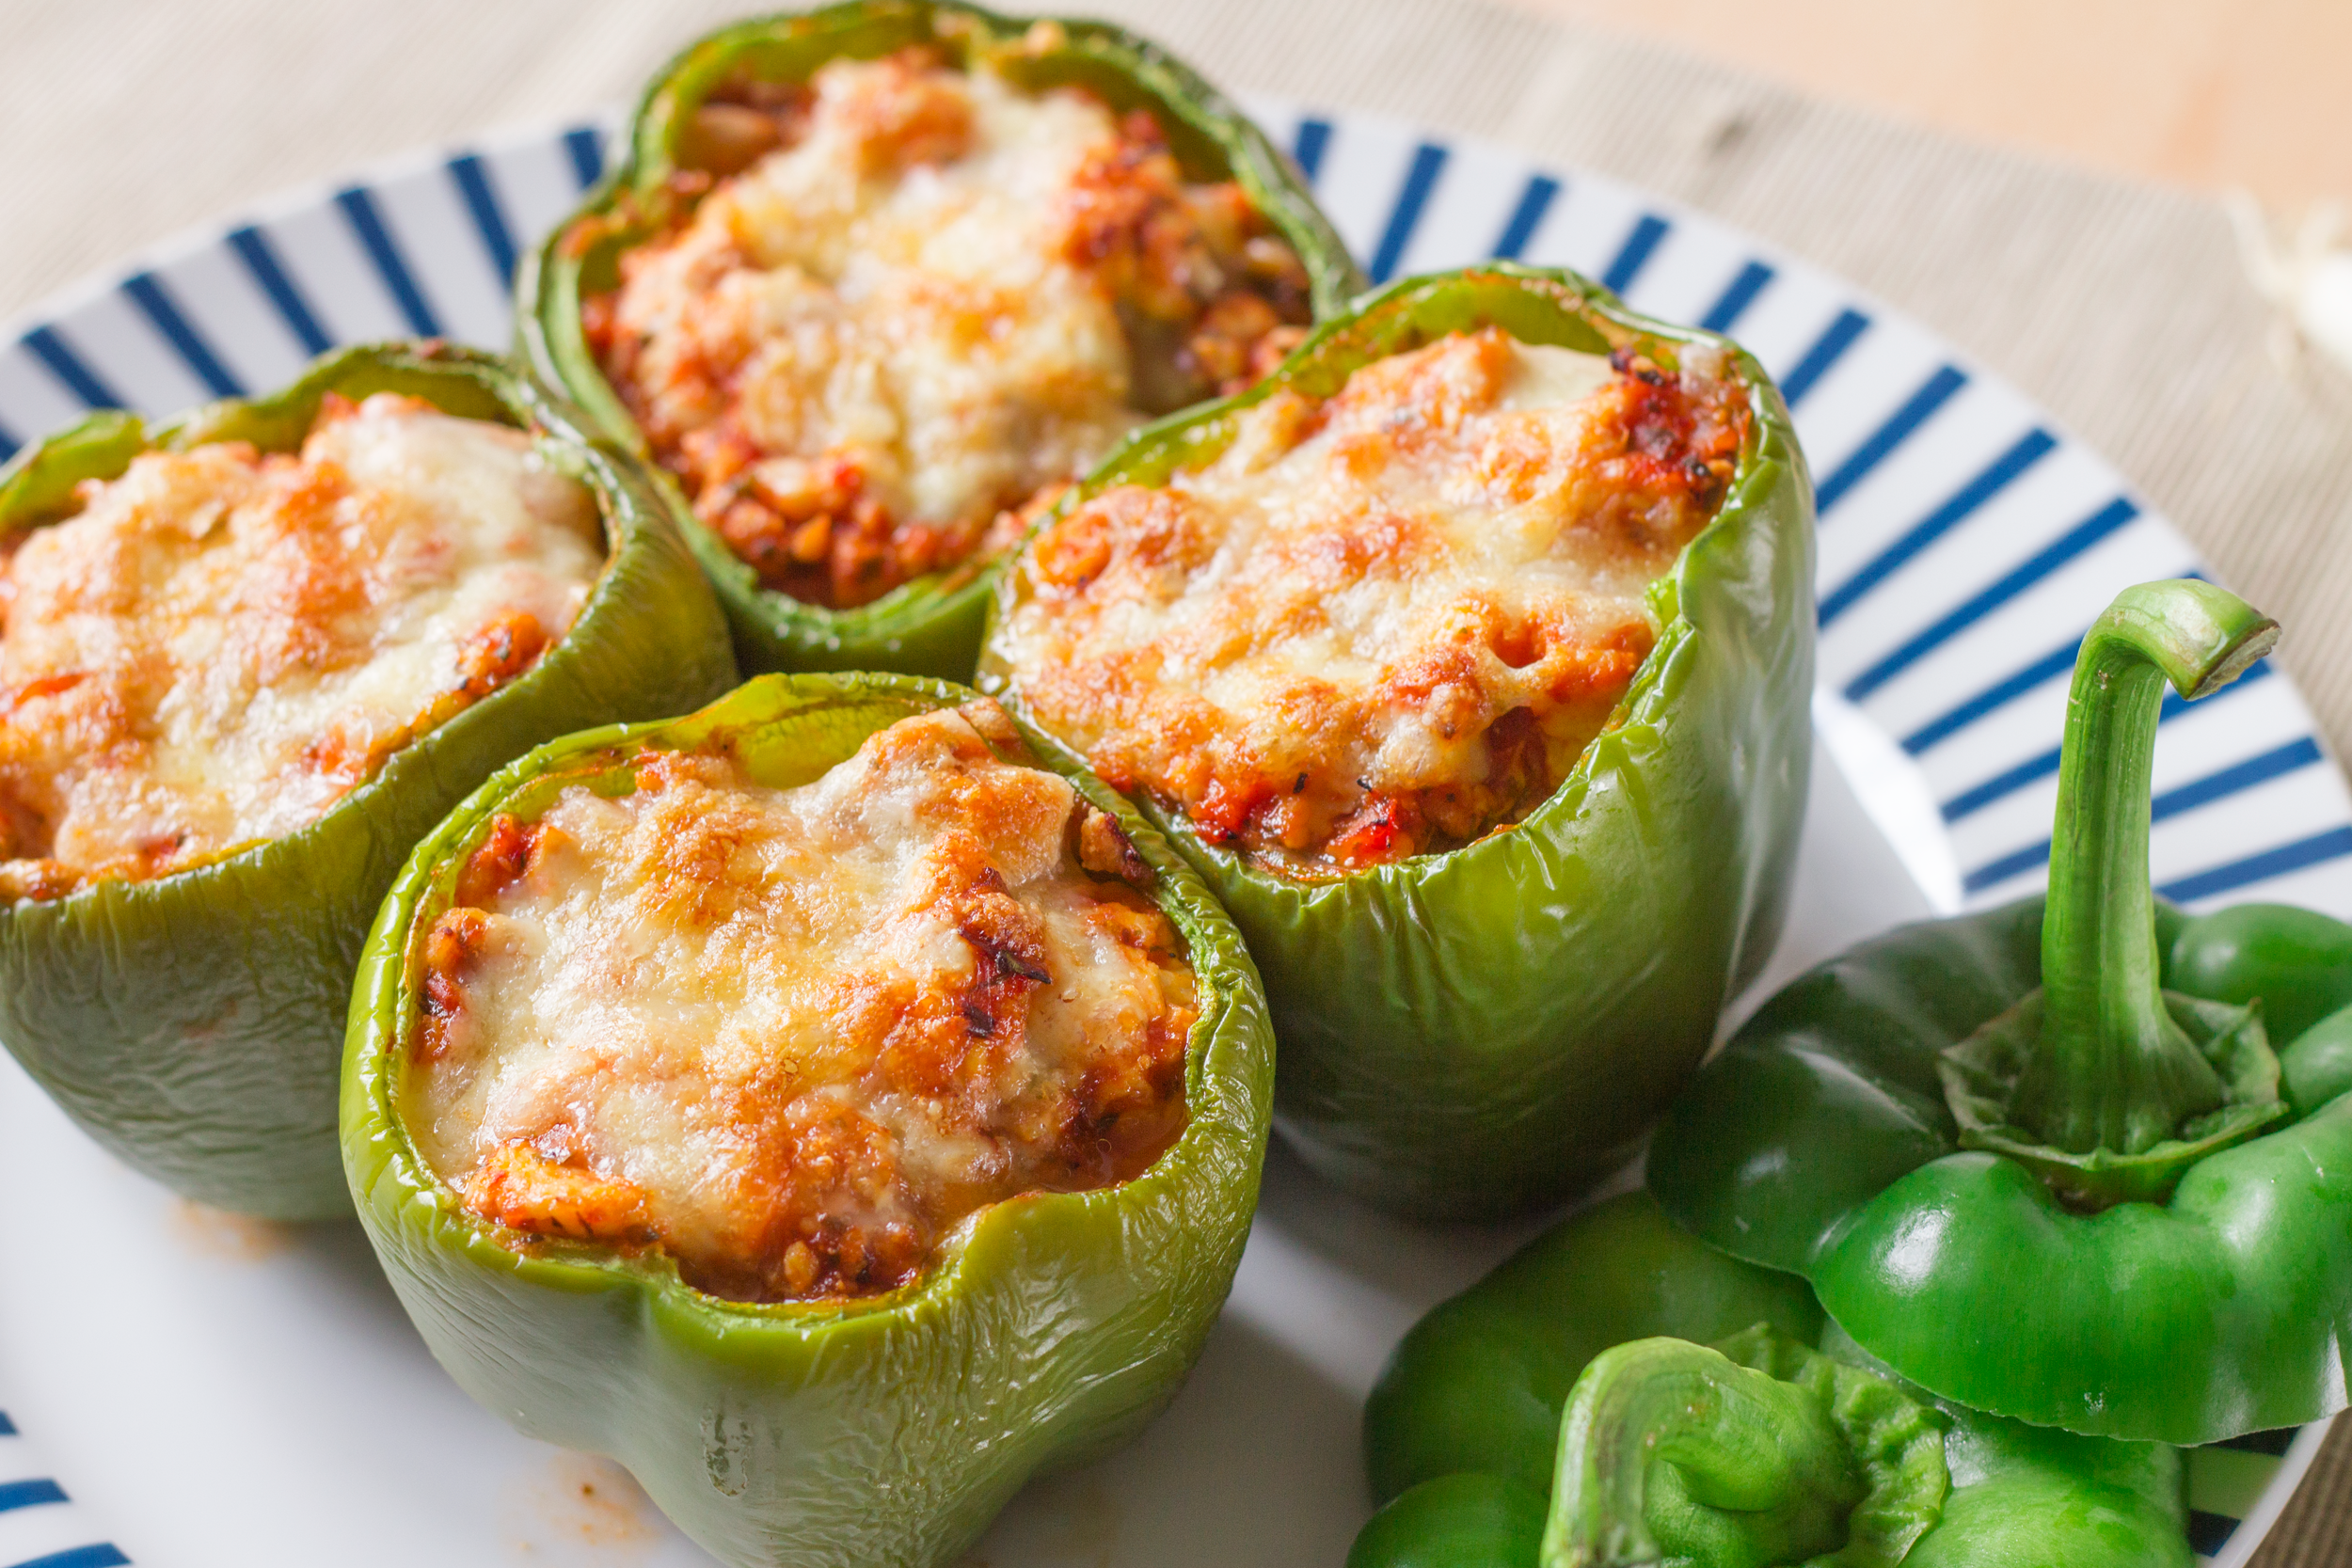 🎼 Healty LOW CARB STUFFED BELL PEPPERS